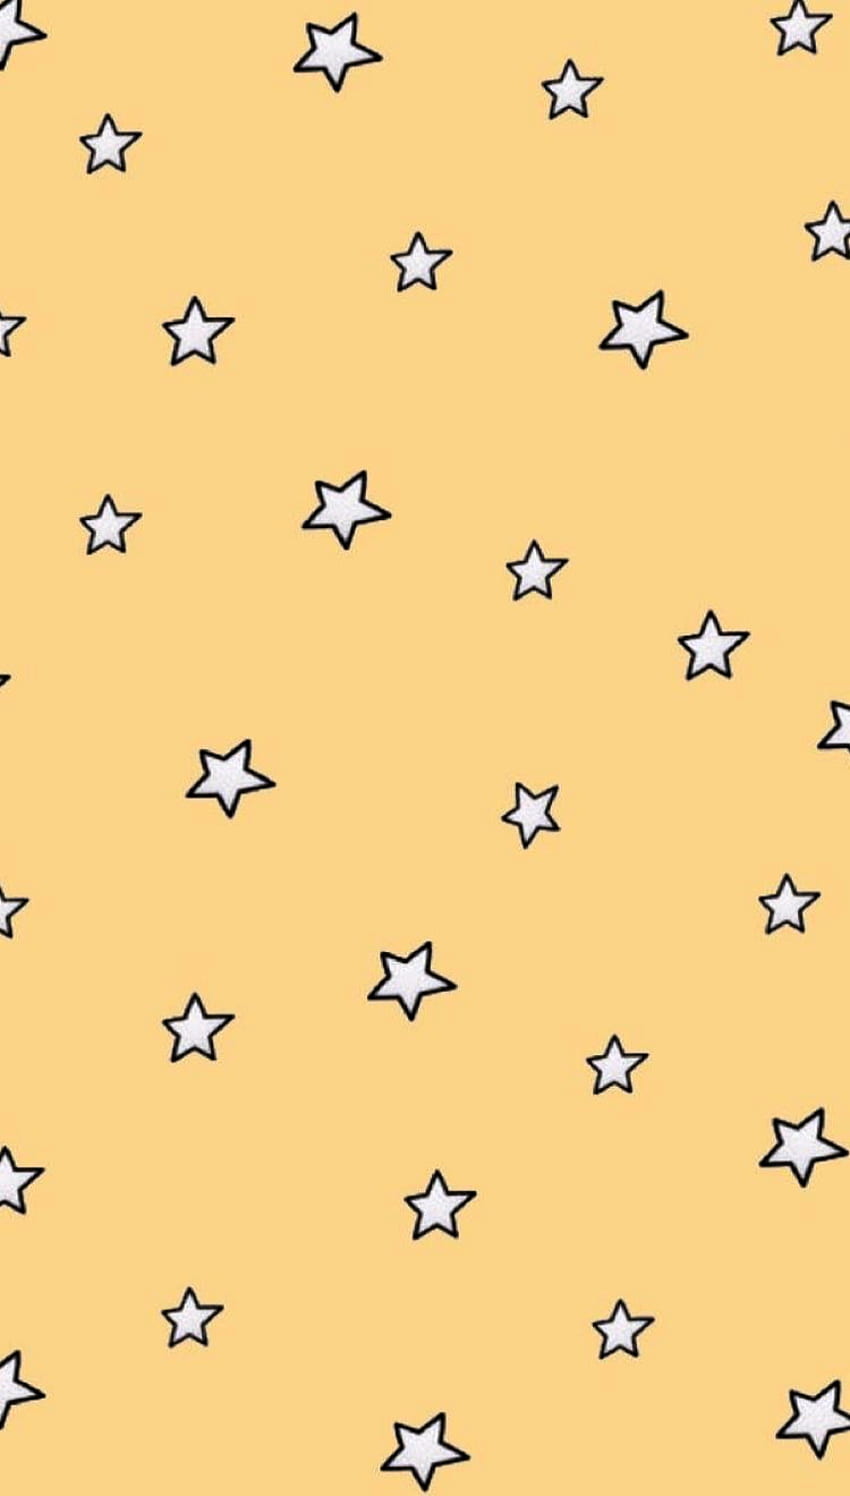 A yellow background with white stars on it - VSCO, Apple Watch